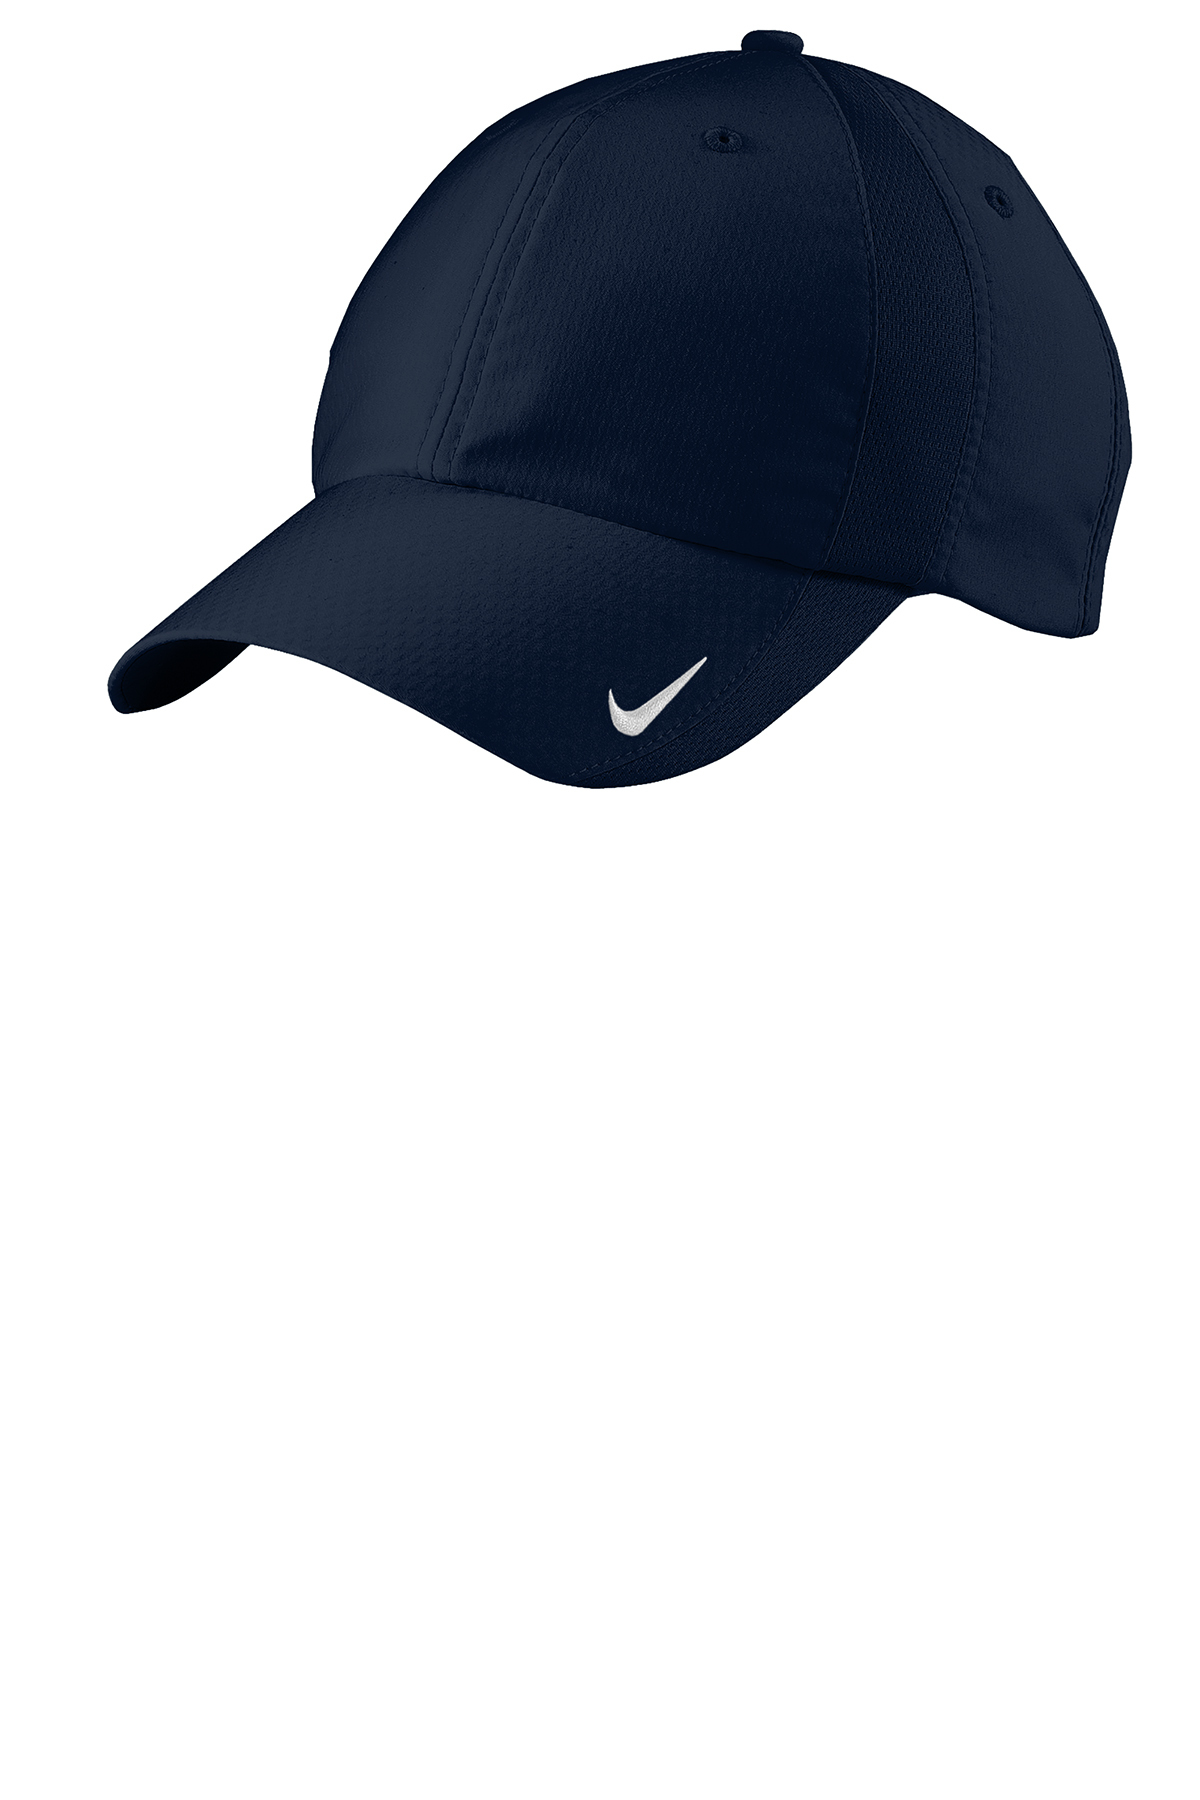 Nike Sphere Dry Cap | Product | Company 